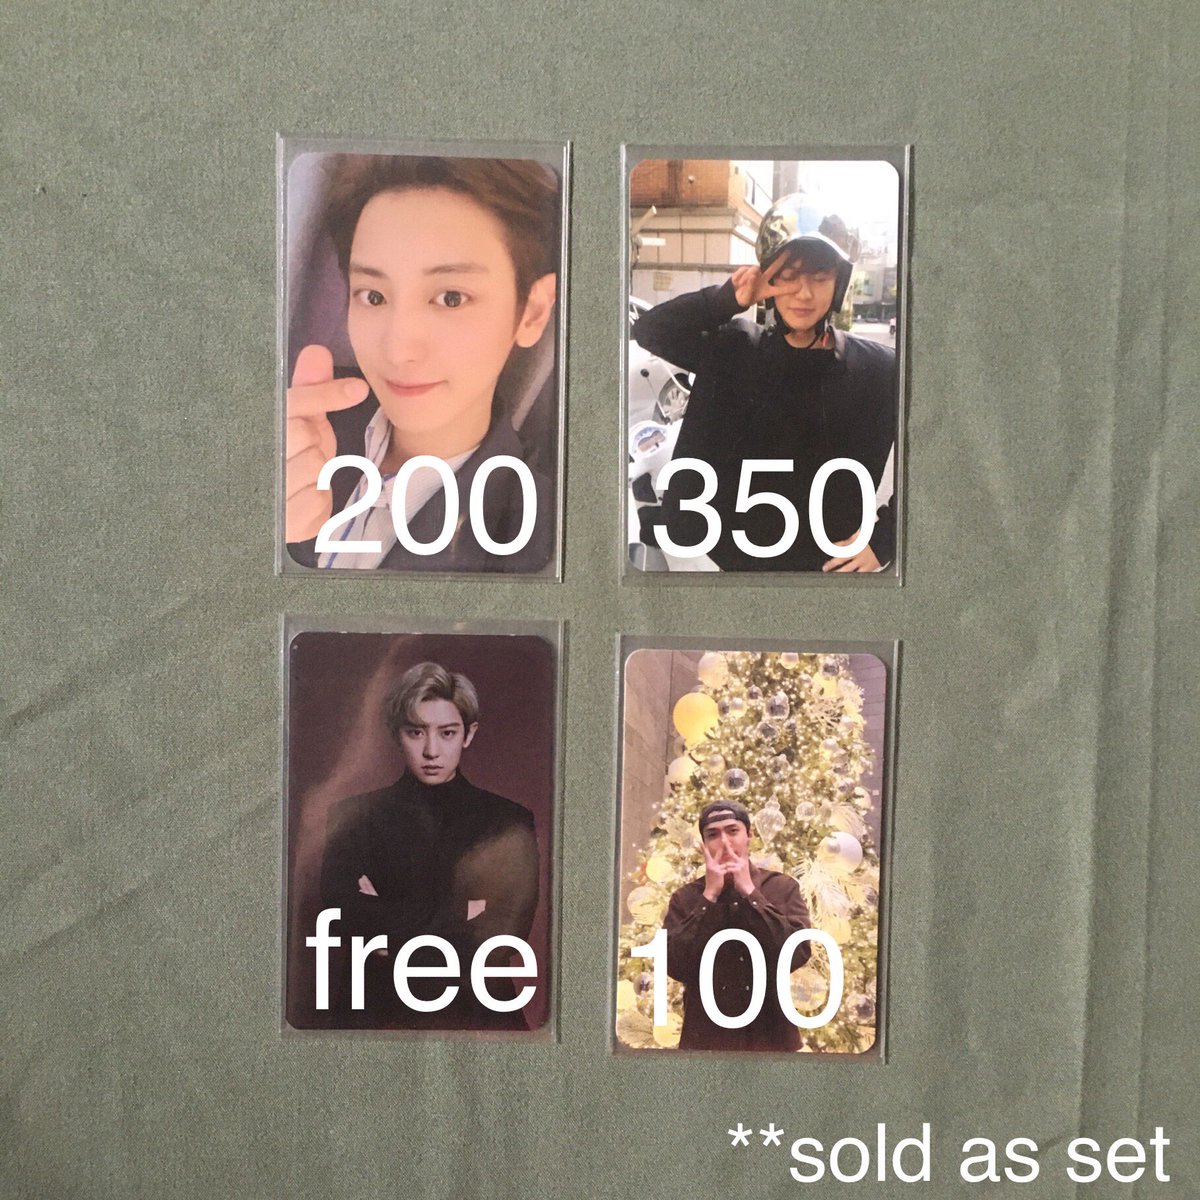 wts lfb ph exo • #dbentas 

SeChan Photocard Set - ₽ 650

- sold as set
- less 100 if payo
- dop: april 28, nrdp: 250
- can meet @ lonsdaleite manila
- read pinned post first .ᐟ

⌗ pc sehun chanyeol sg 2021 photopack exo sc wal what a life helmetyeol ls v3 pink xmas